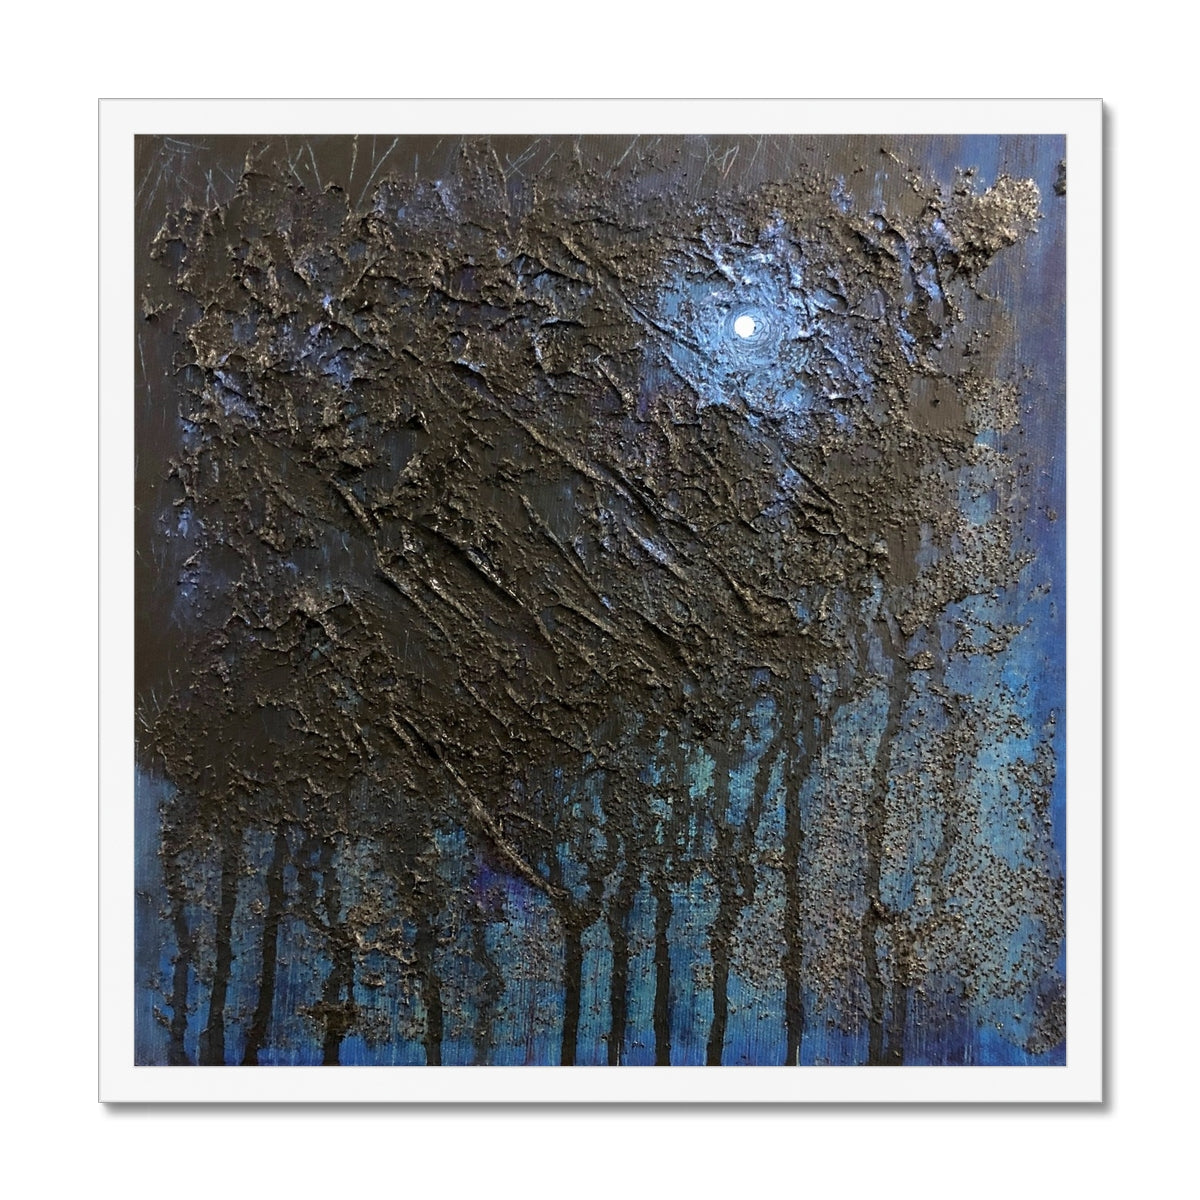 The Blue Moon Wood Abstract Painting | Framed Prints From Scotland-Framed Prints-Abstract & Impressionistic Art Gallery-20"x20"-White Frame-Paintings, Prints, Homeware, Art Gifts From Scotland By Scottish Artist Kevin Hunter